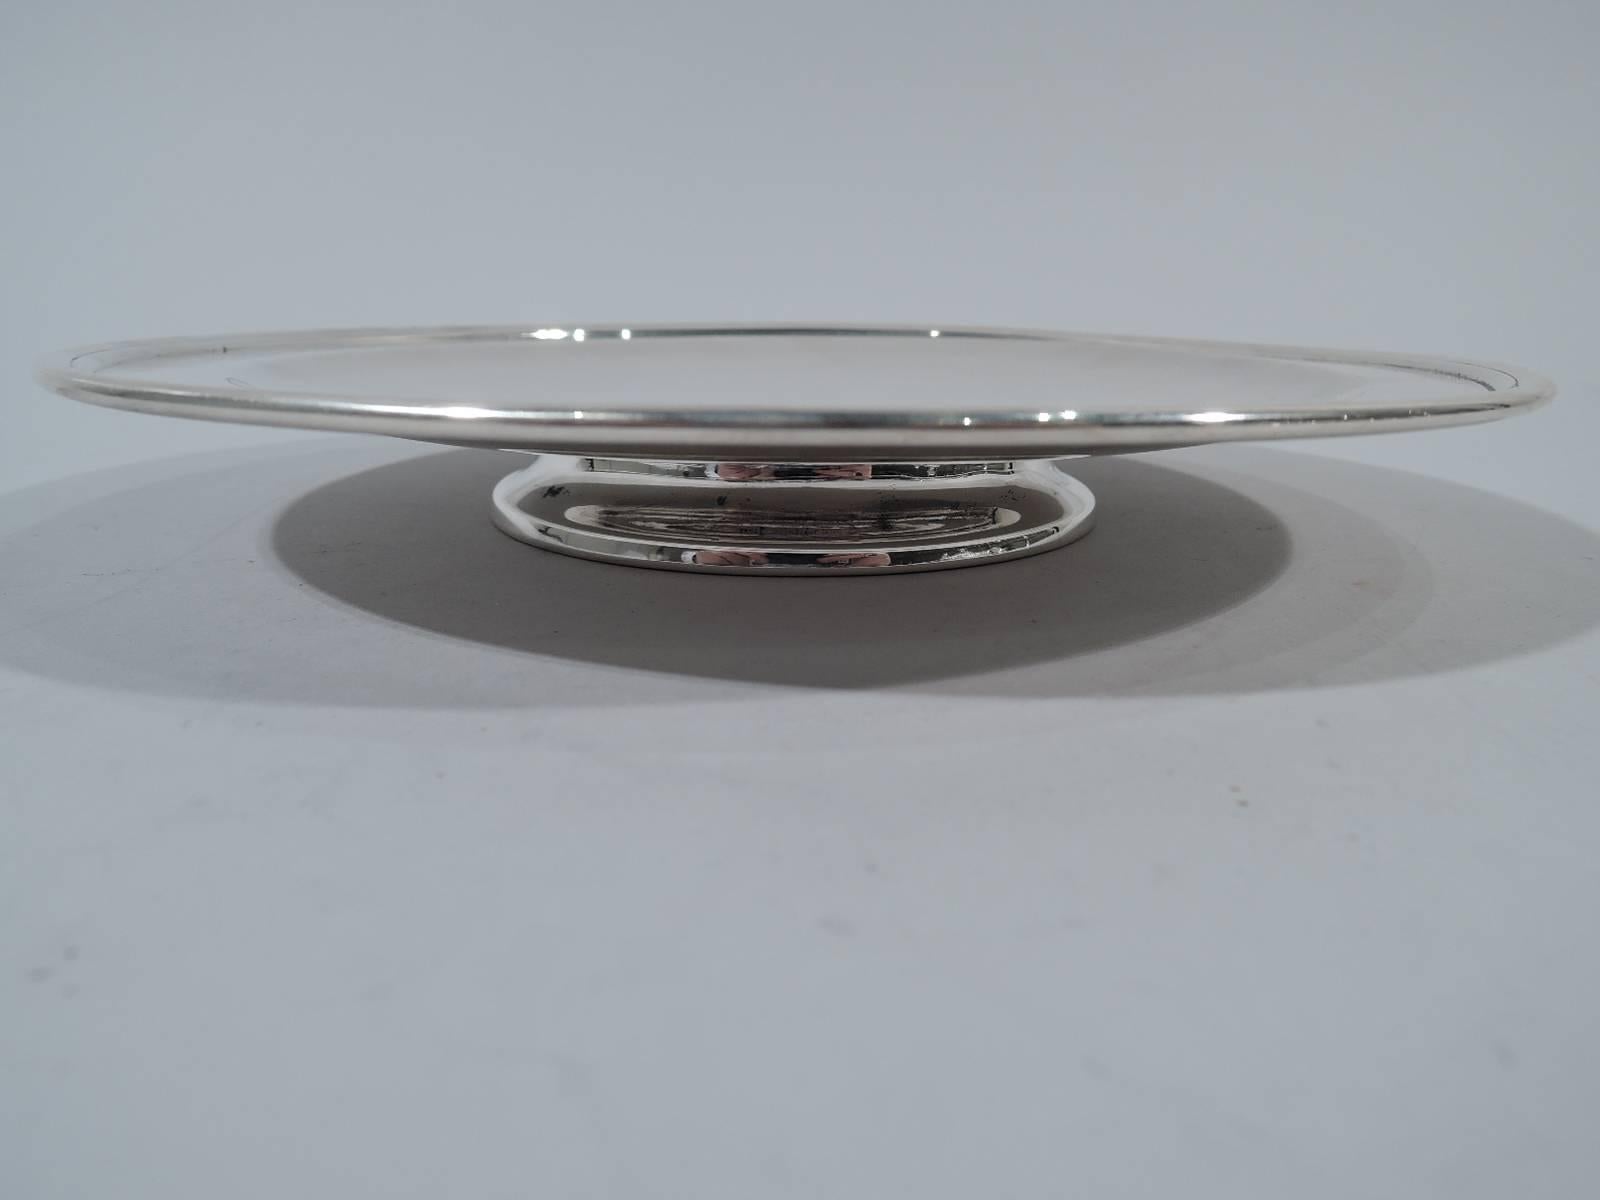 Edwardian sterling silver cake plate. Made by Tiffany & Co. in New York, circa 1909. Soft well and molded rim. Short spread foot. Hallmark includes pattern no. 17266C (first produced in 1909) and director’s letter m (1907-47). Weight: 13 troy ounces.